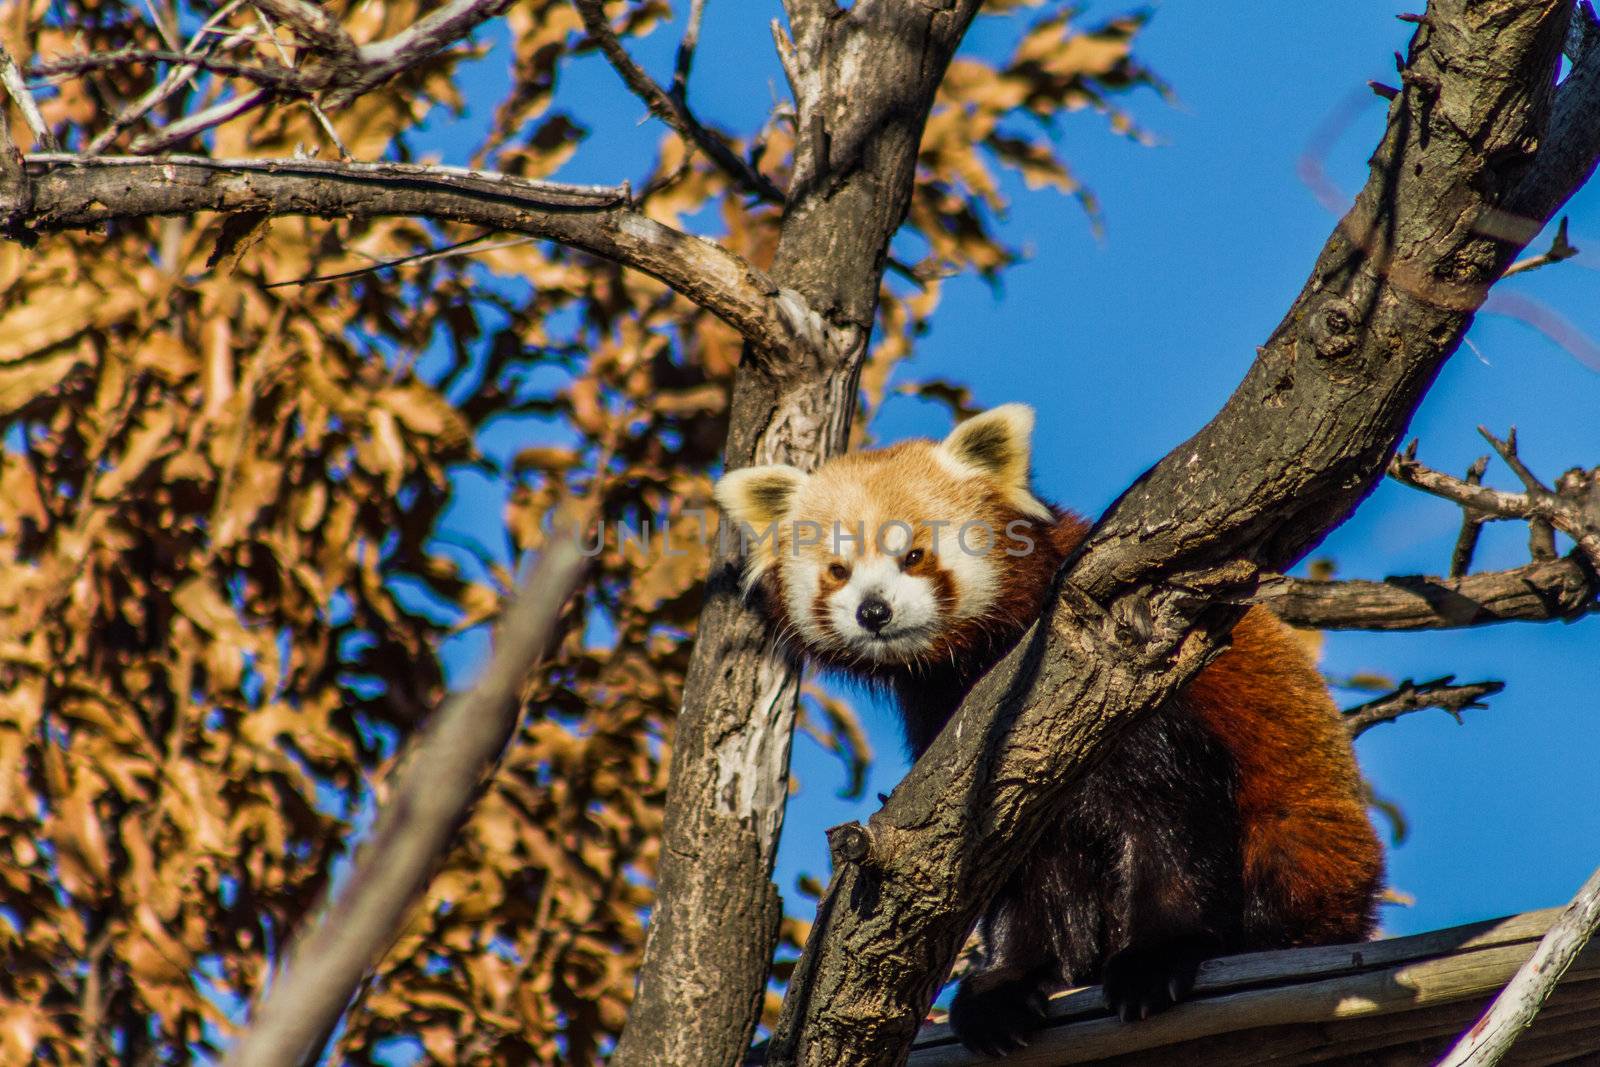 Image of a red Panda